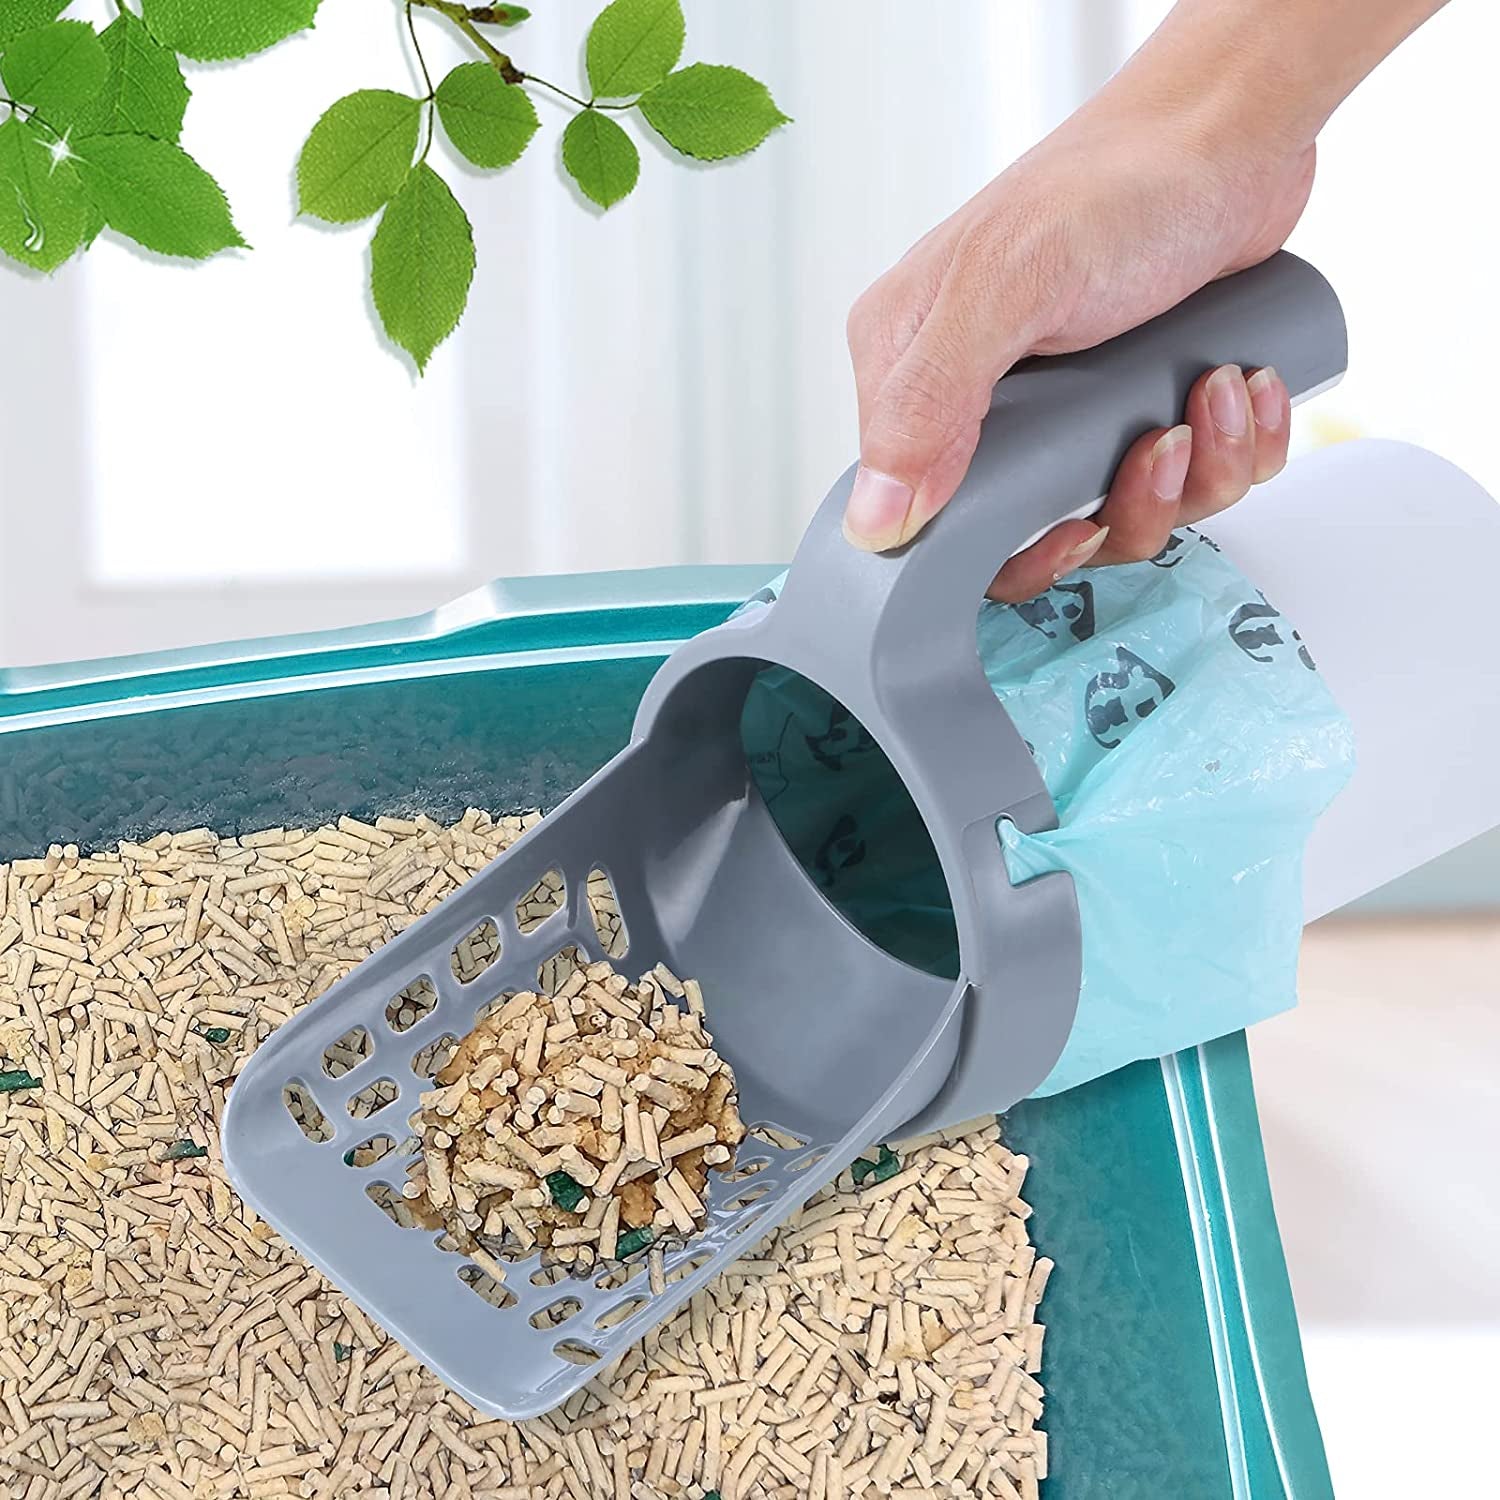 Cat Litter Scooper Large Capacity with Built-In Bag Cat Shovel Pet Cle


Product Description:Item Type:Cat Litter ShovelMaterial:ABSSize: 12x29cm (1cm=0.39inches)Weight:200gFeatures:
1.This cat litter scoop comes with a trash can, whicBag Cat Shovel Pet Cleaning Poop Bag Kitten Cleaning Tool Pet Accessories